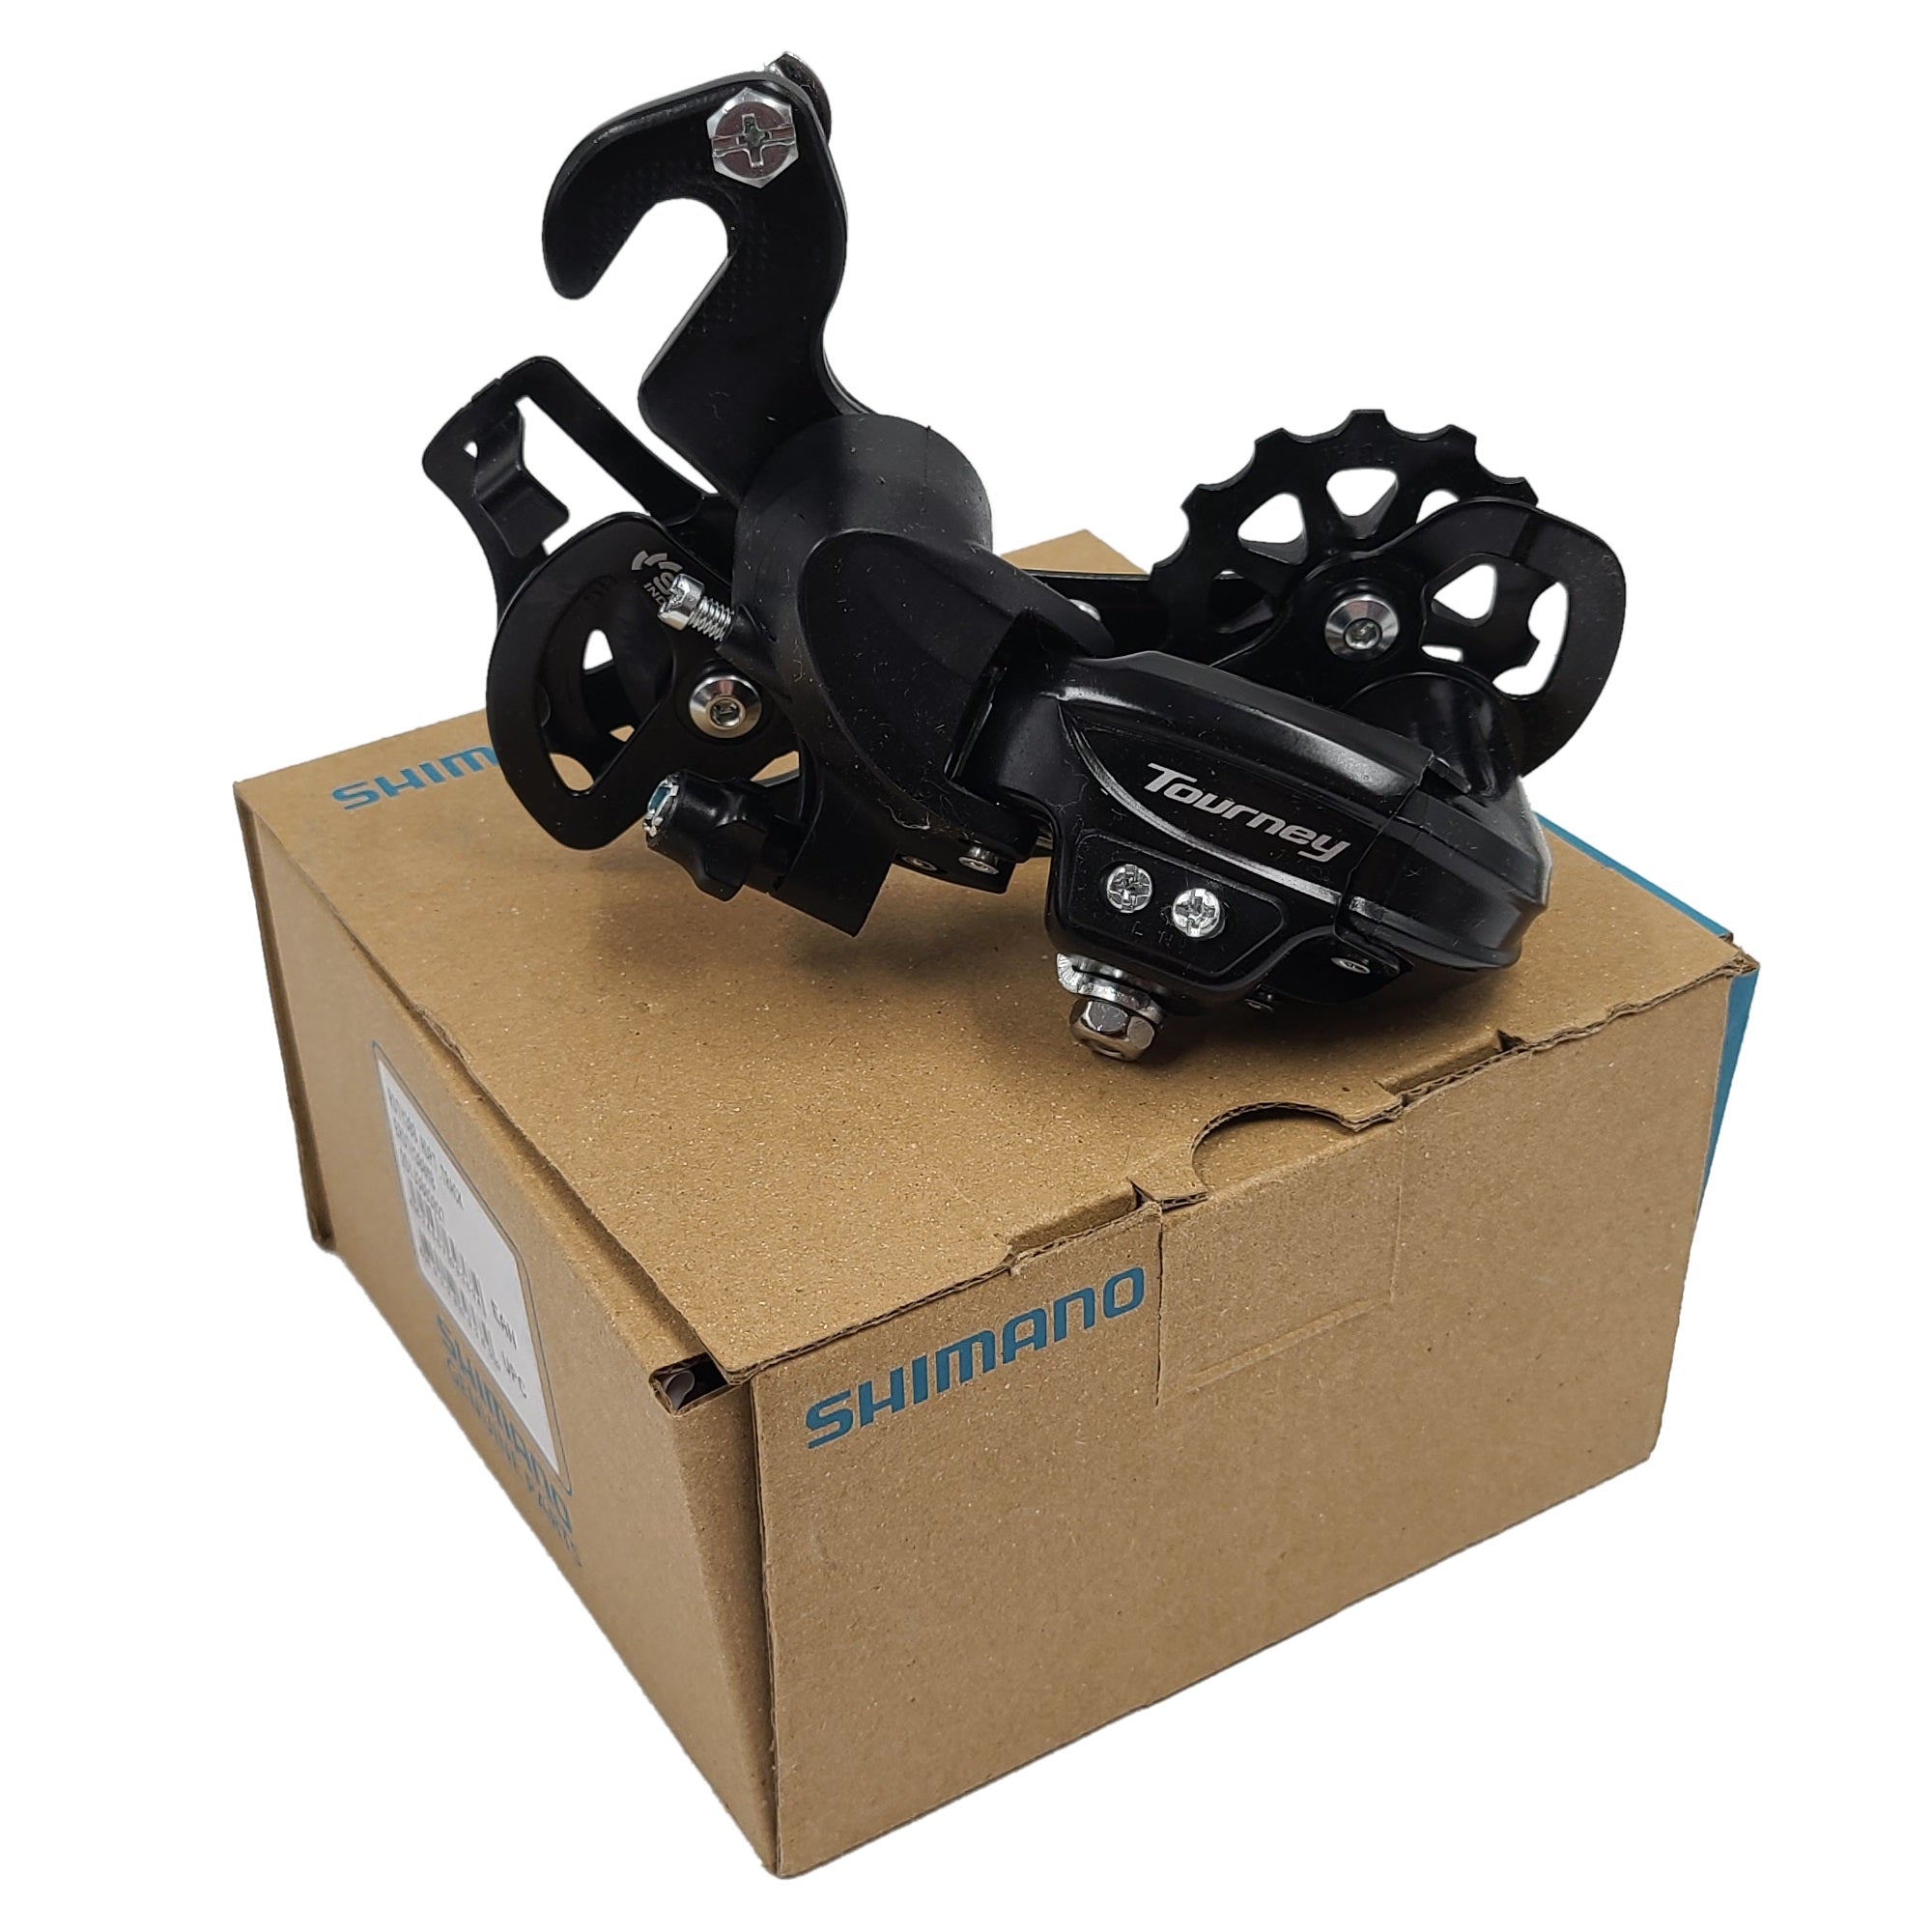 Shimano Tourney RD-TY300-SGS 7 Speed Rear Derailleur with Horizontal Dropout Hanger - The Bikesmiths